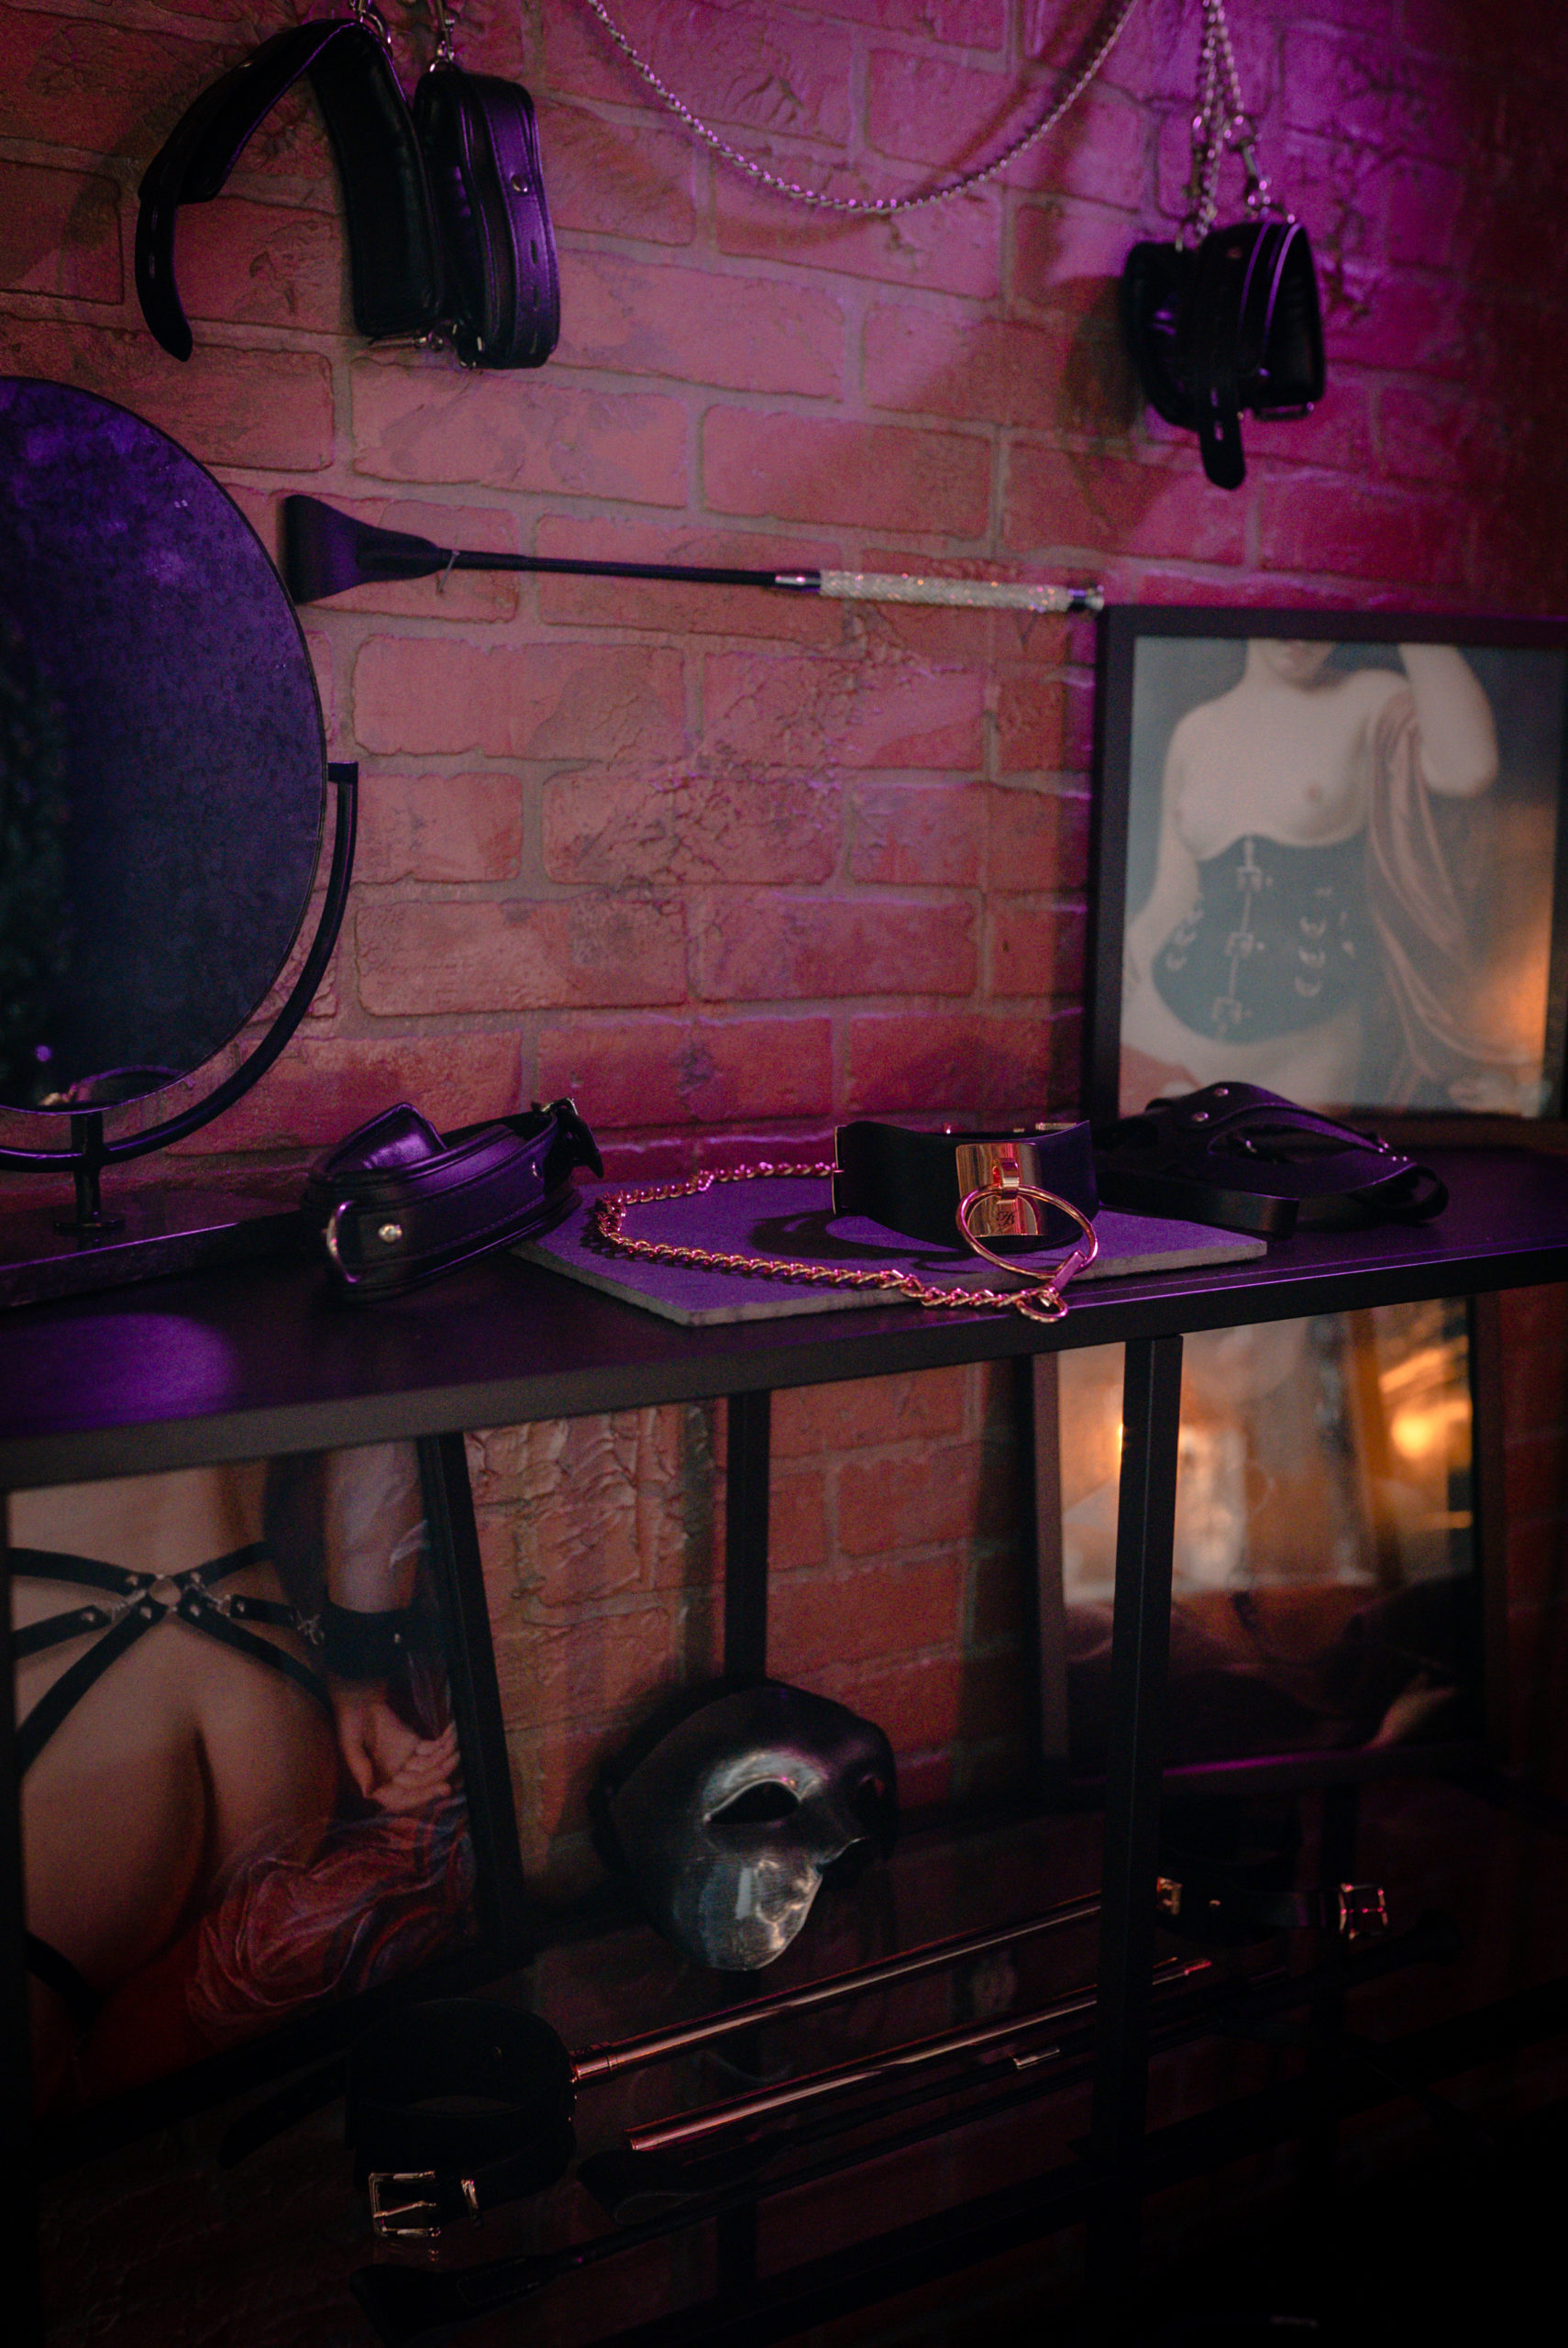 BDSM Toys are showcased on a wall and table